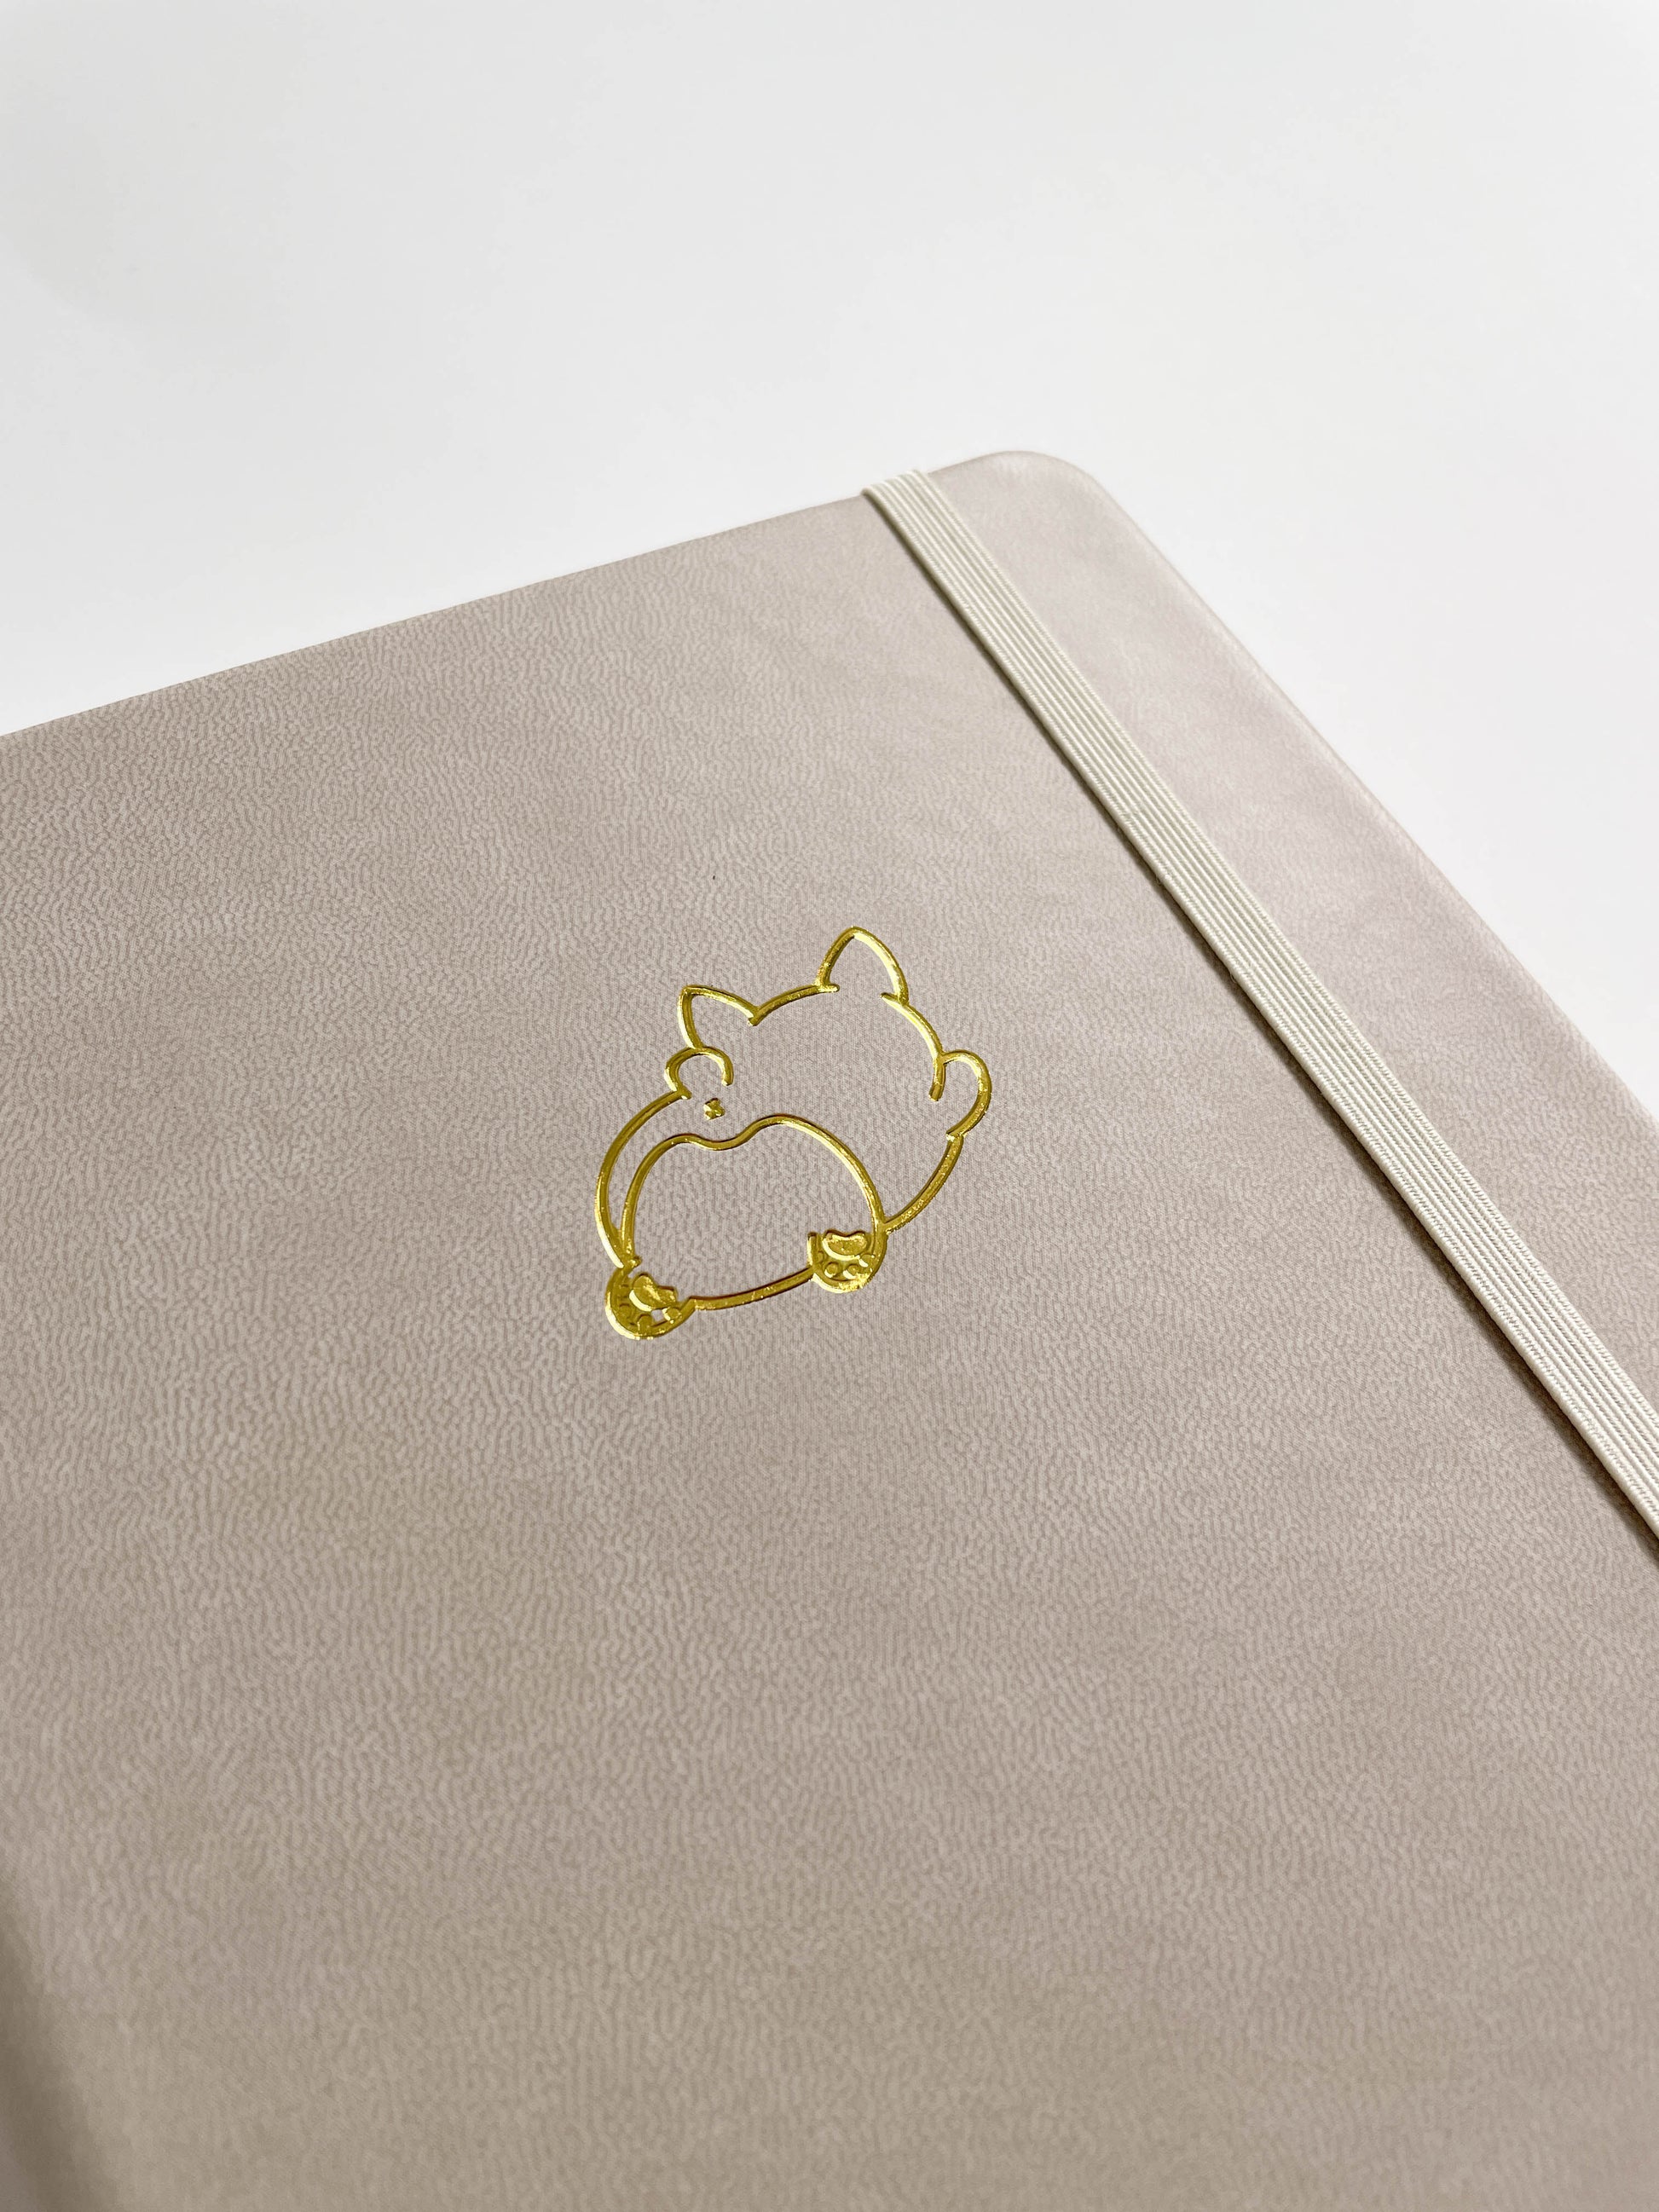 Close up view of the an ivory bullet journal with a gold foil embossed design of a chunky Corgi splooting.